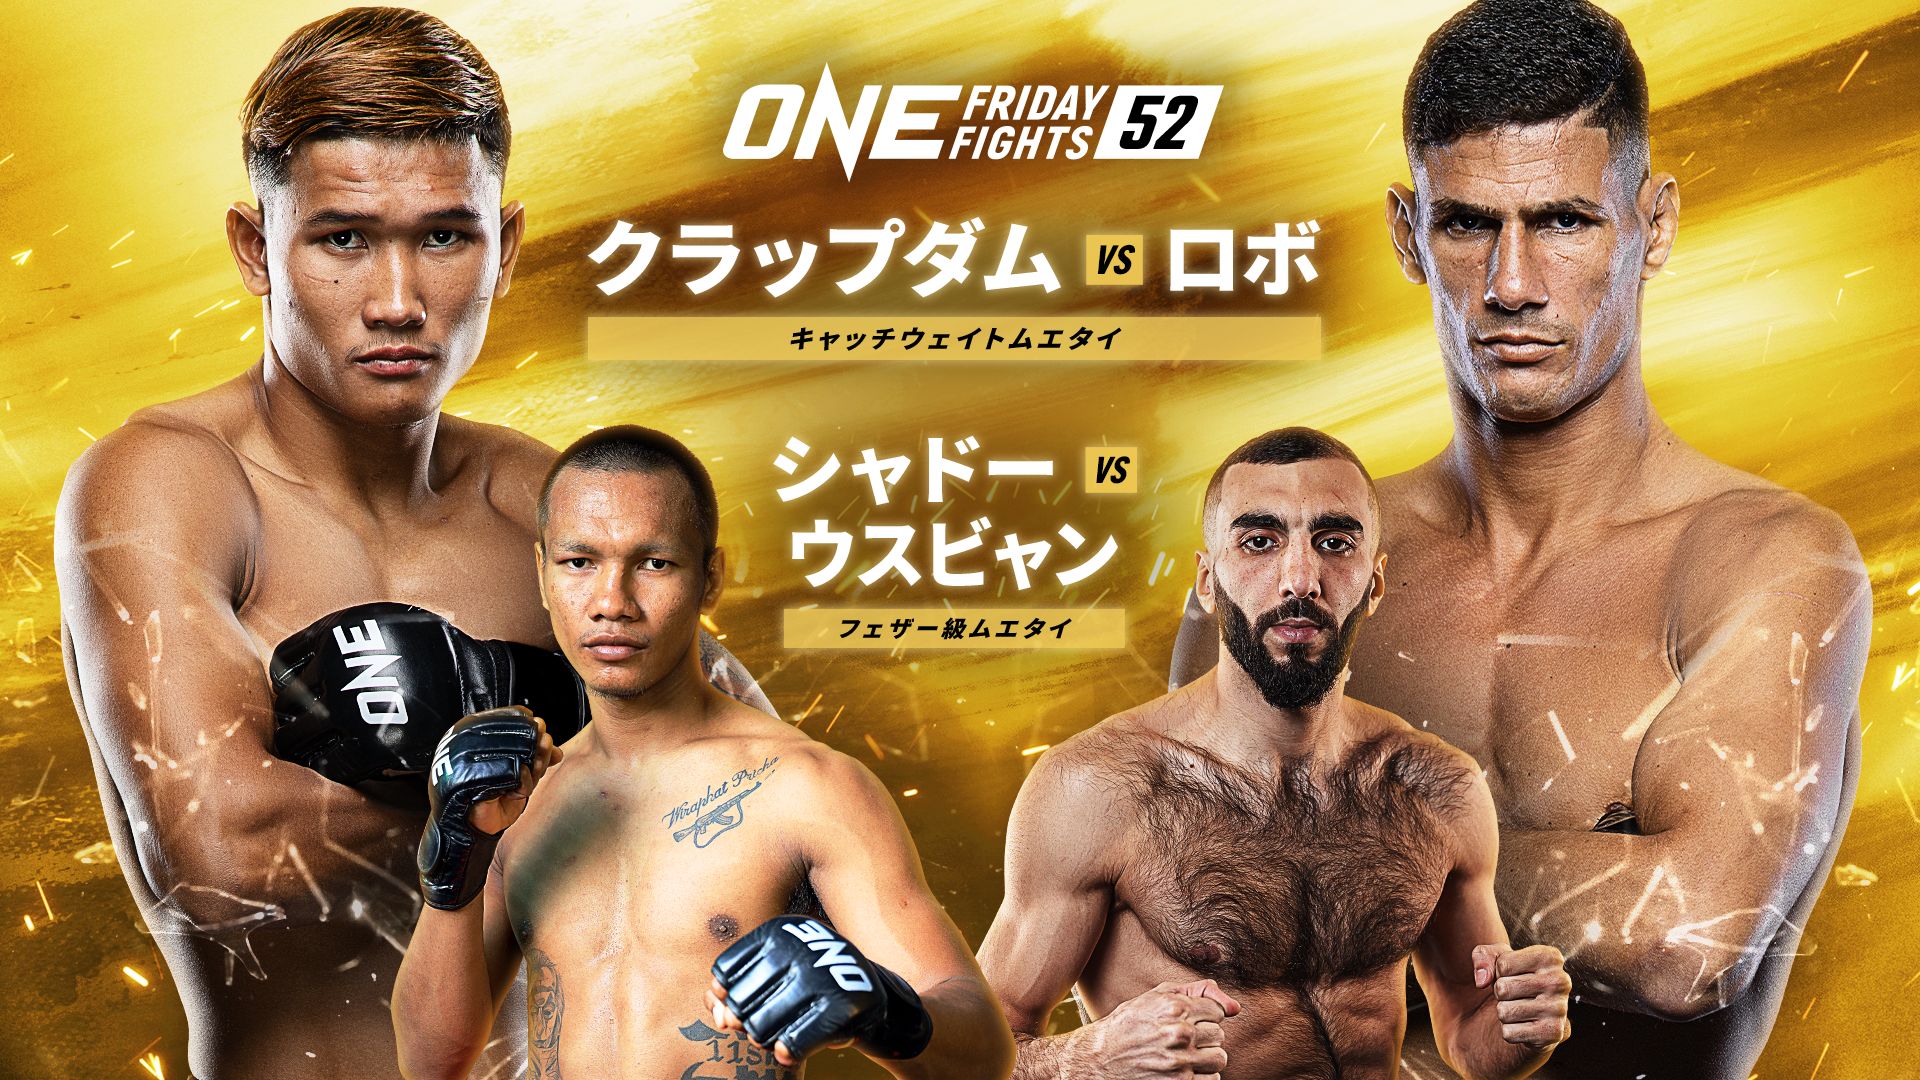 ONE Friday Fights 52